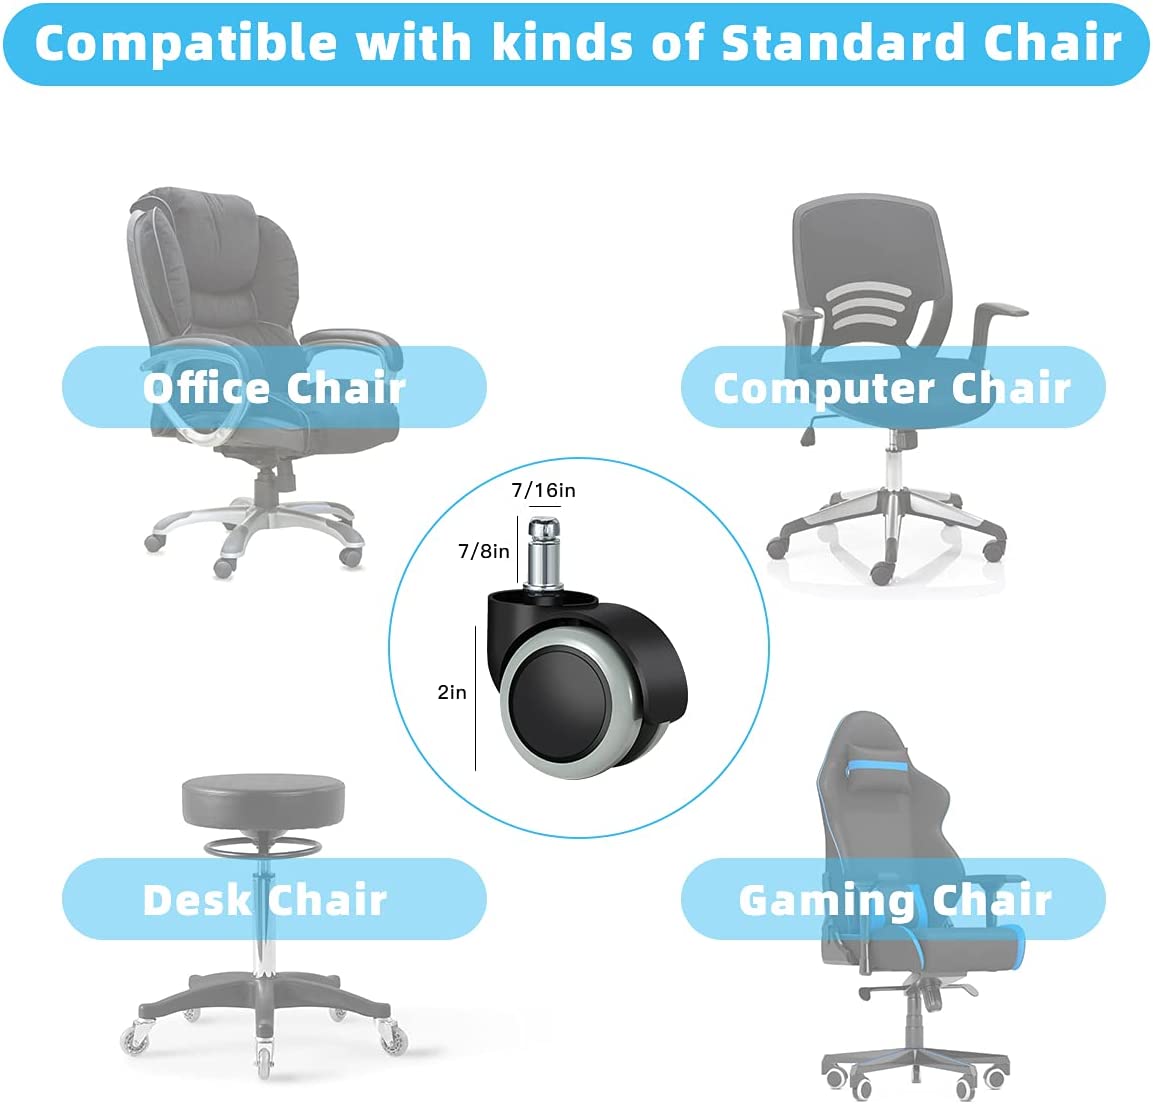 I-office chair caster wheel (9)